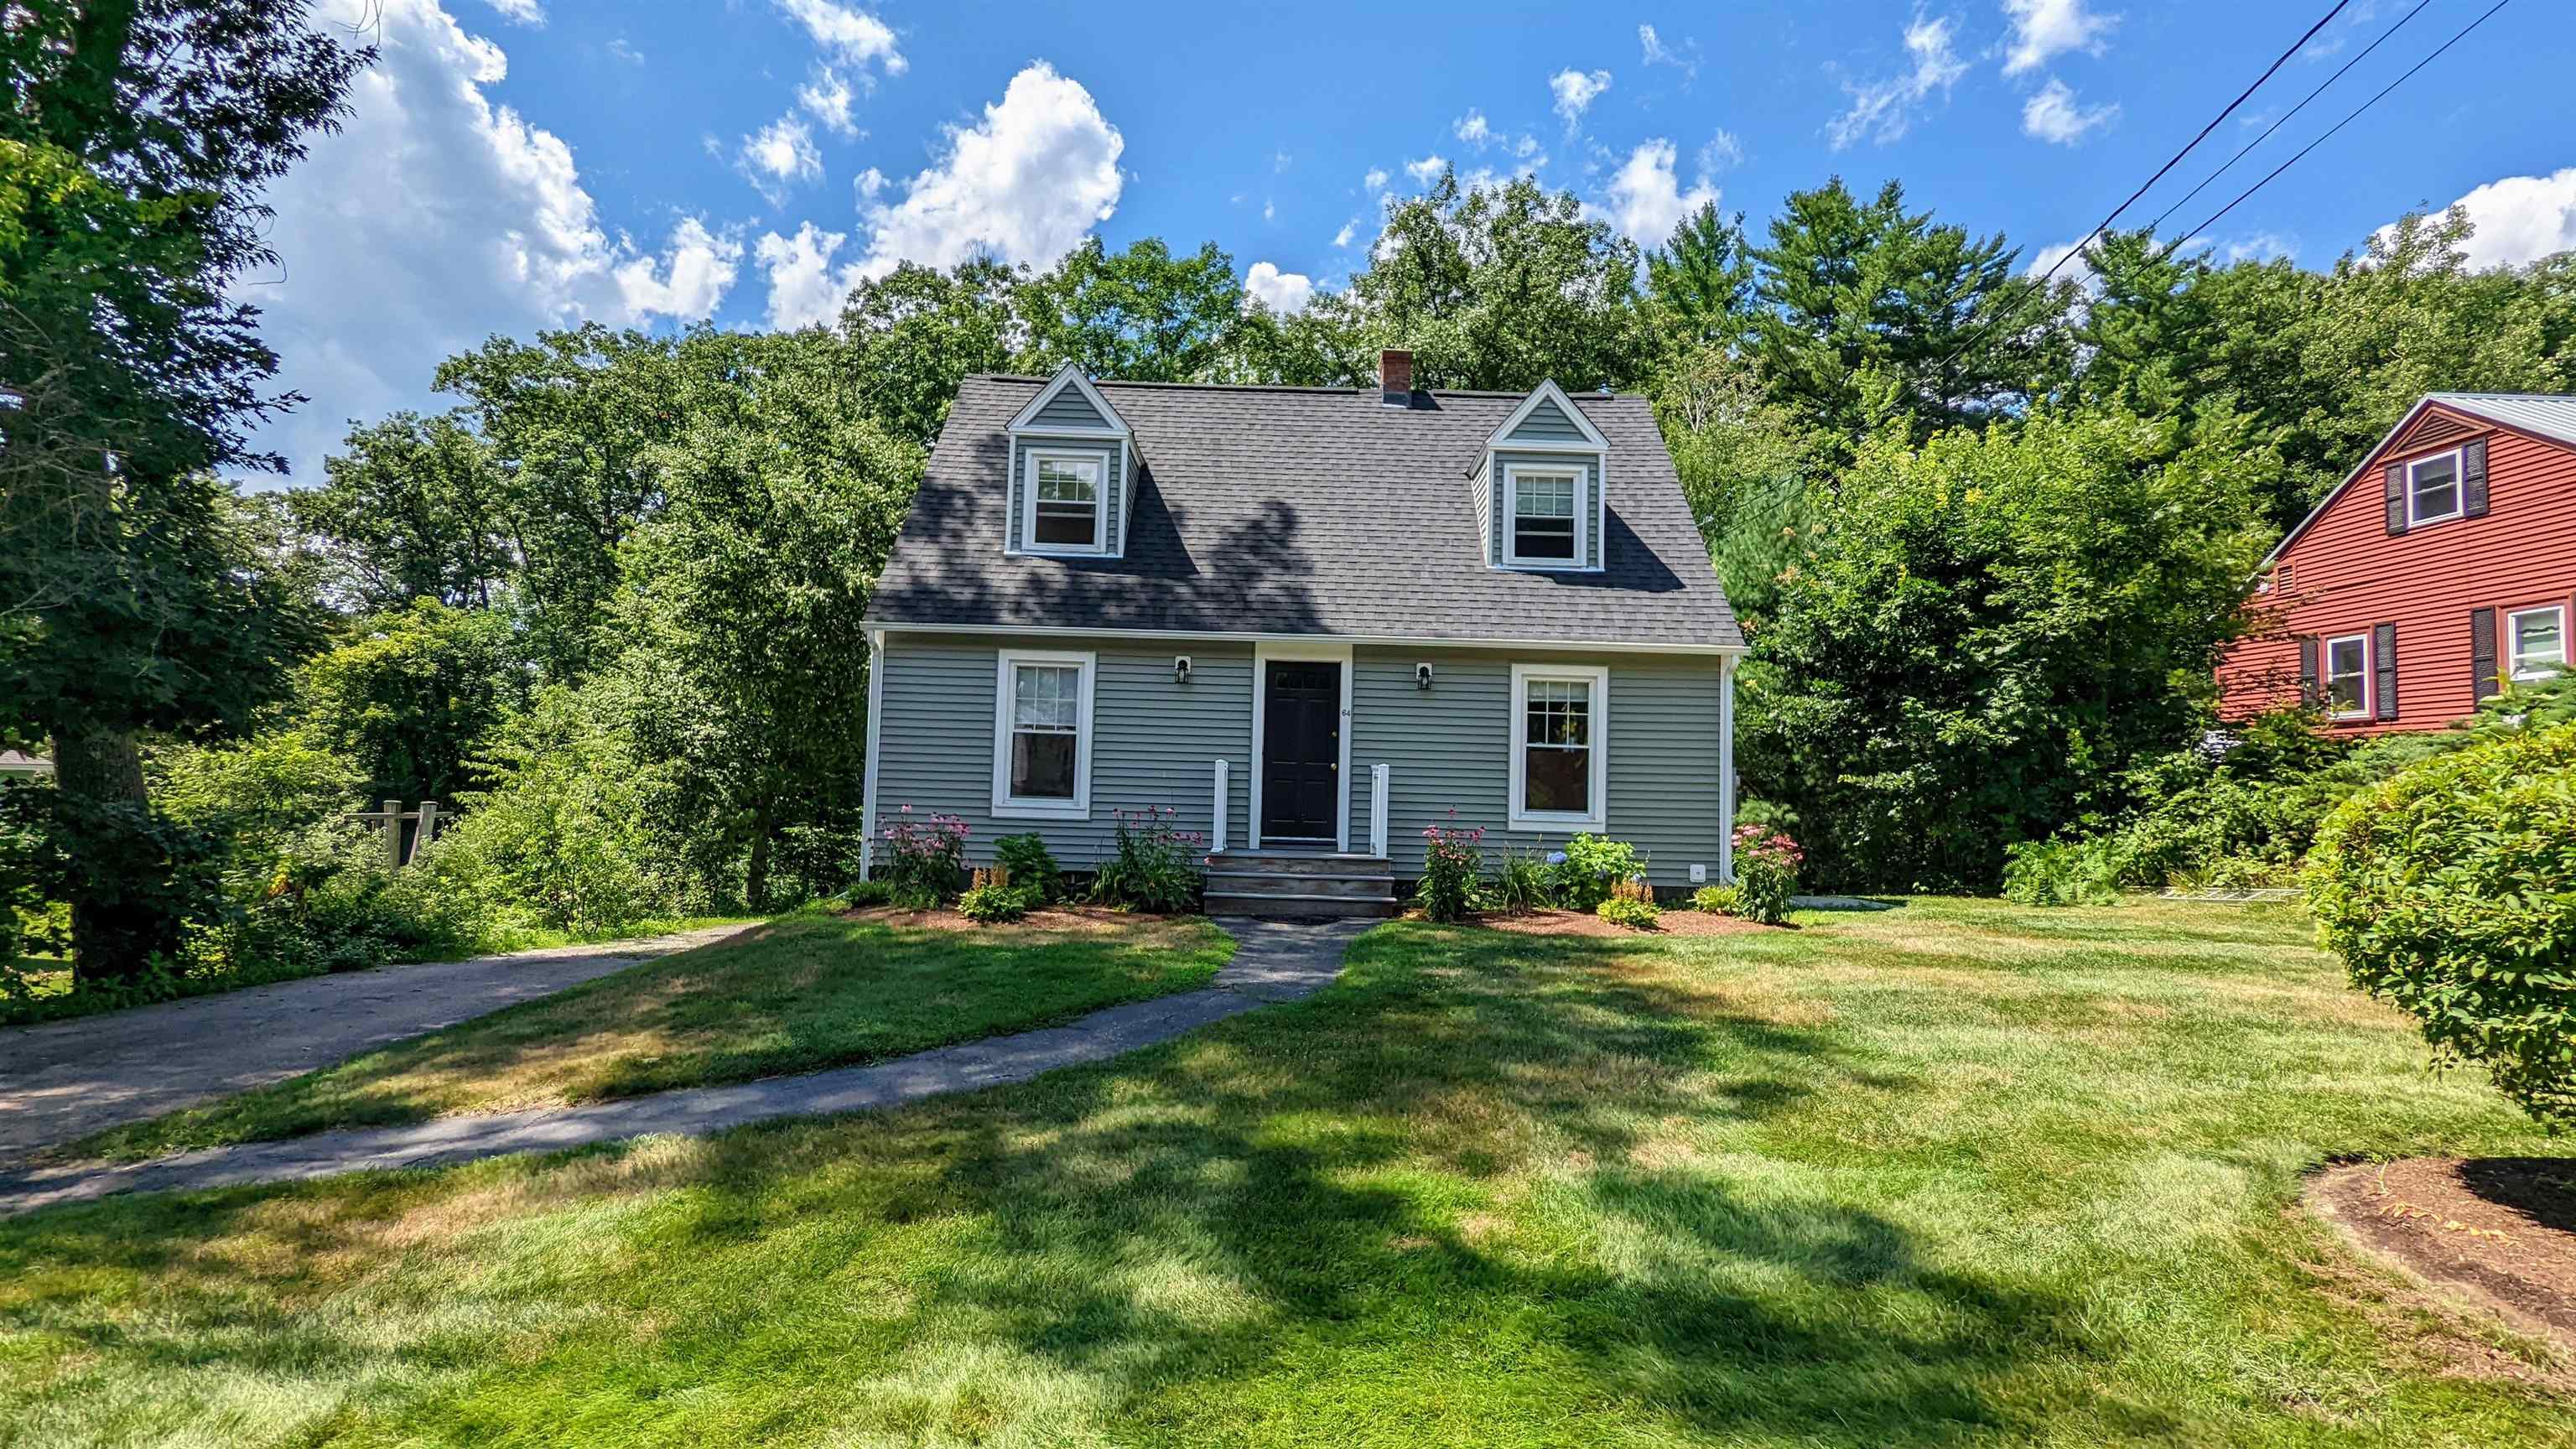 64 Cottonwood Avenue, Laconia, New Hampshire, NH 03246, 3 Bedrooms Bedrooms, 10 Rooms Rooms,1 BathroomBathrooms,Single Family,For Rent,4932310